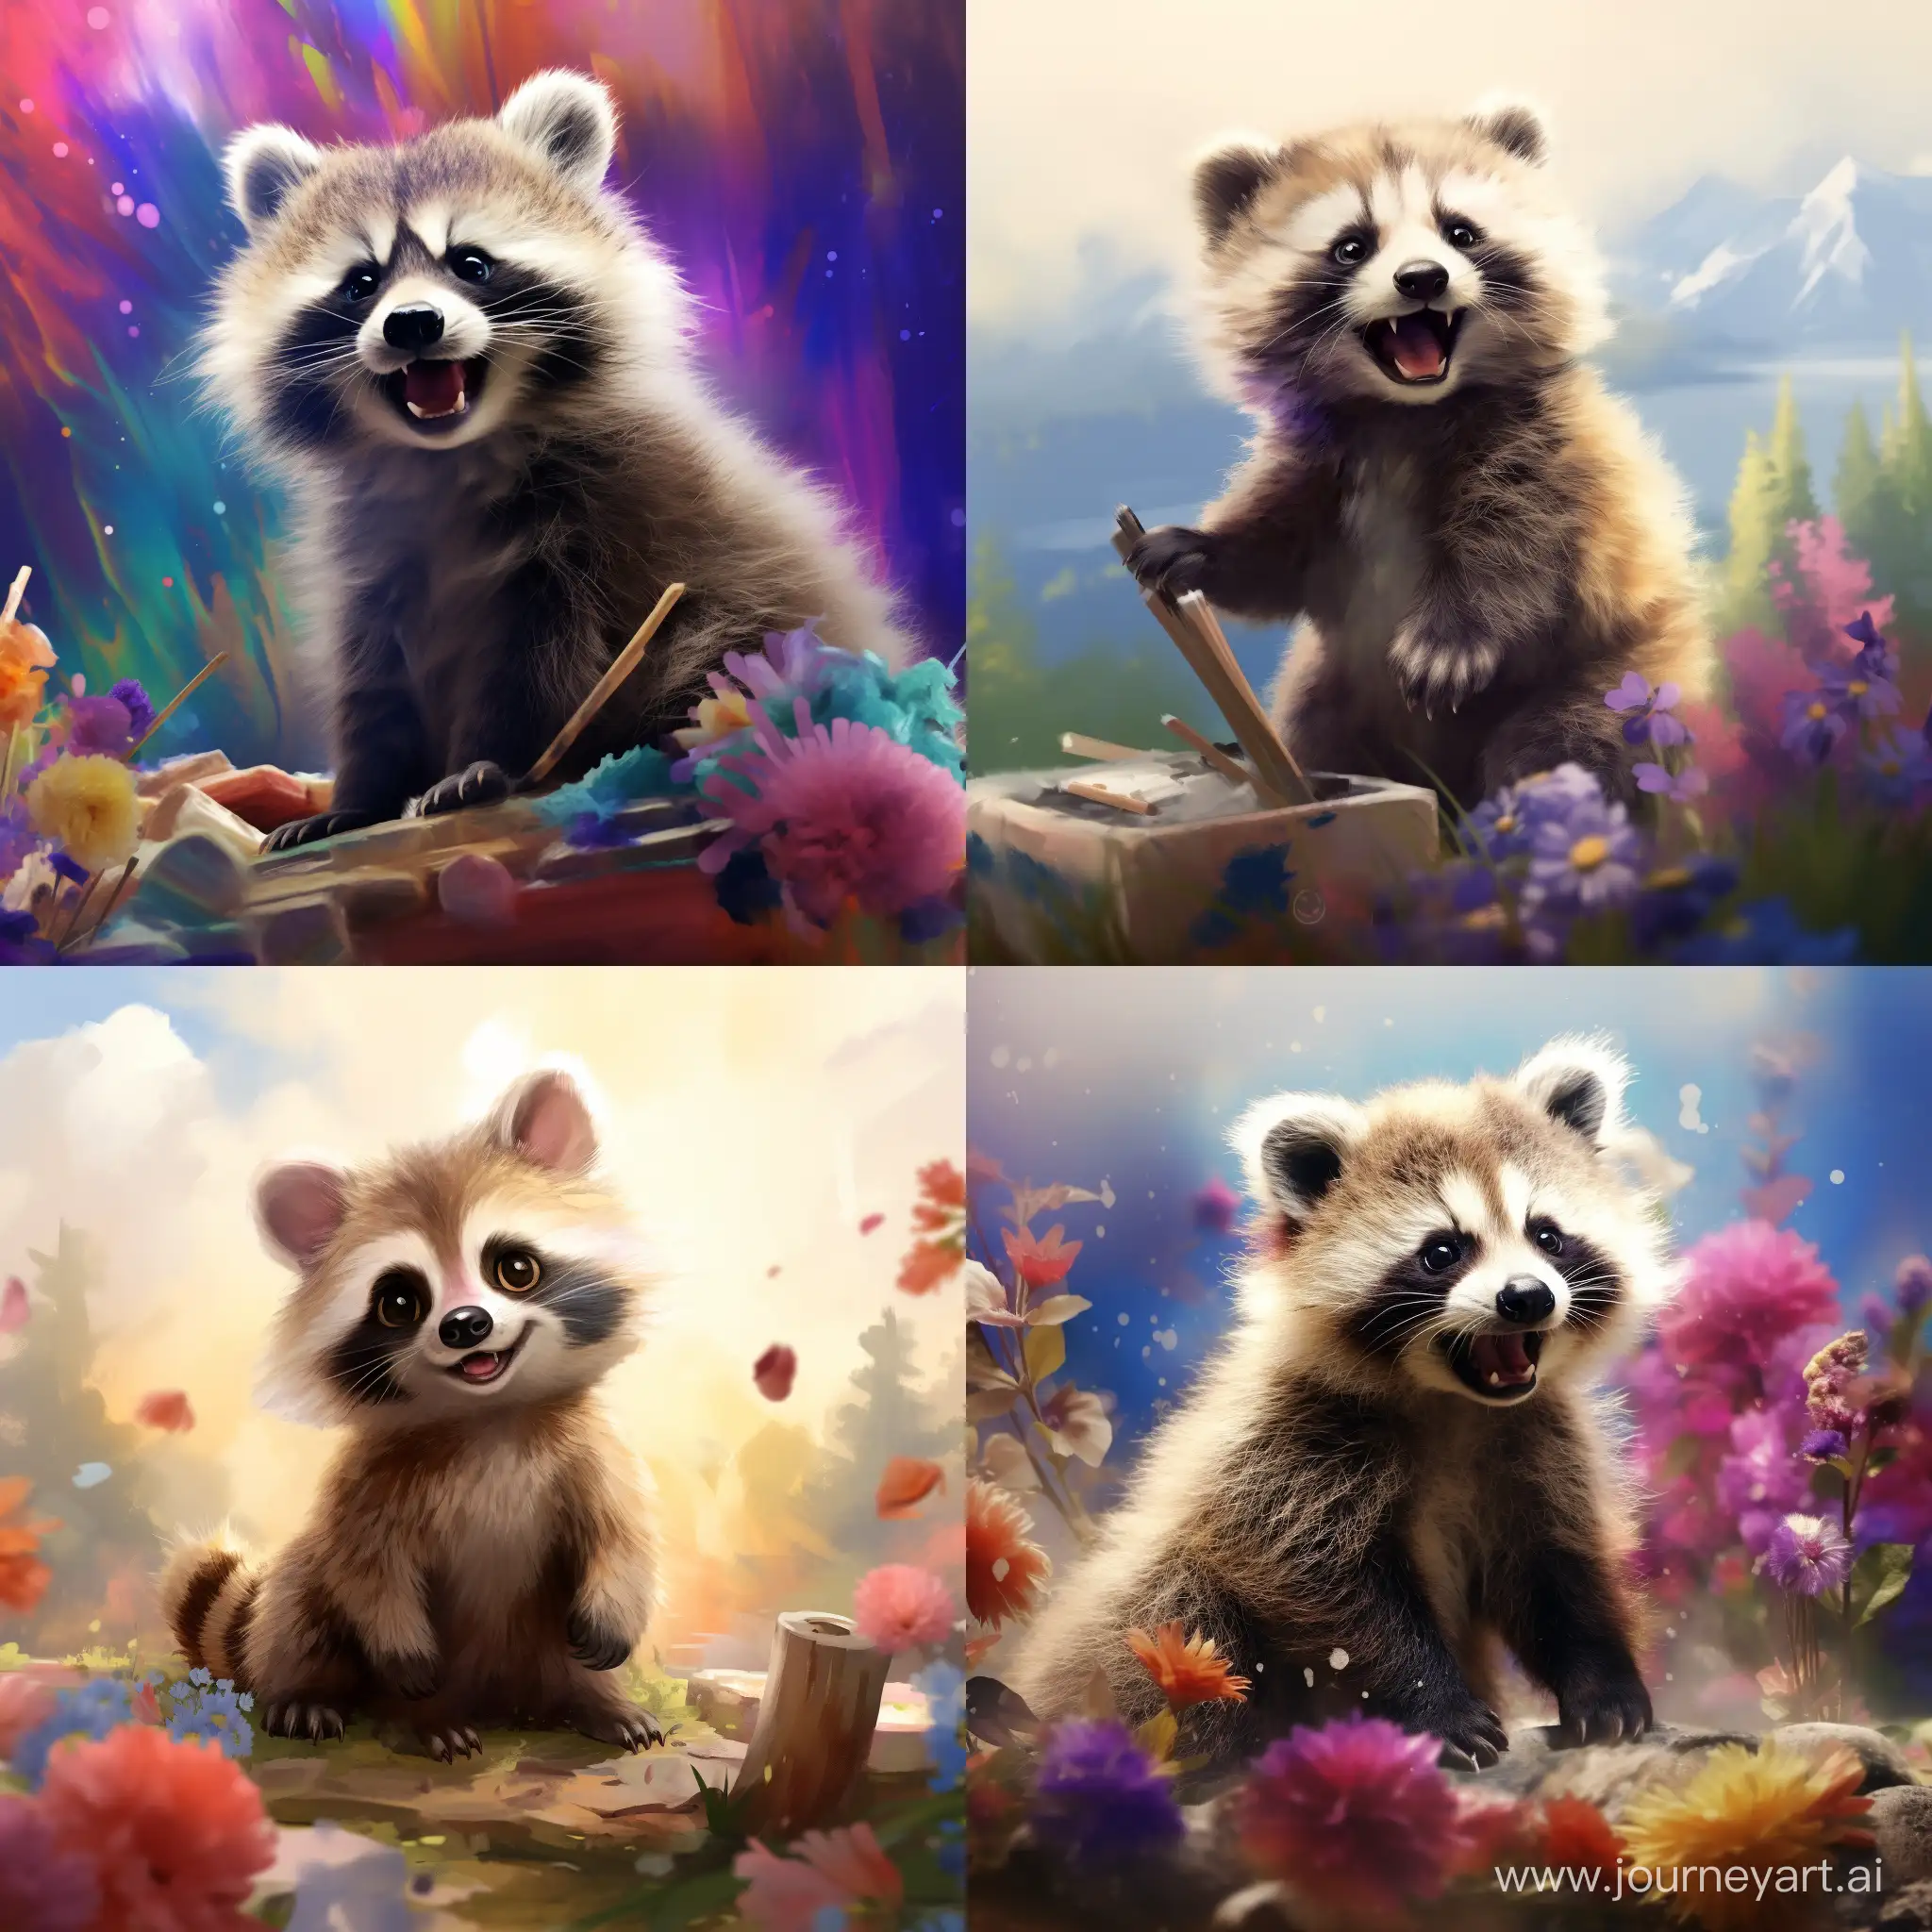 
generation
generation
generation
Cover




Create a detailed image of a Cute fluffy Kawai baby racoon growling engaging in watercolor painting, blending artistic elements with the creativity, fine brushstrokes, and the serene beauty of the landscape., 3d render, illustration, conceptual art, portrait photography, photo